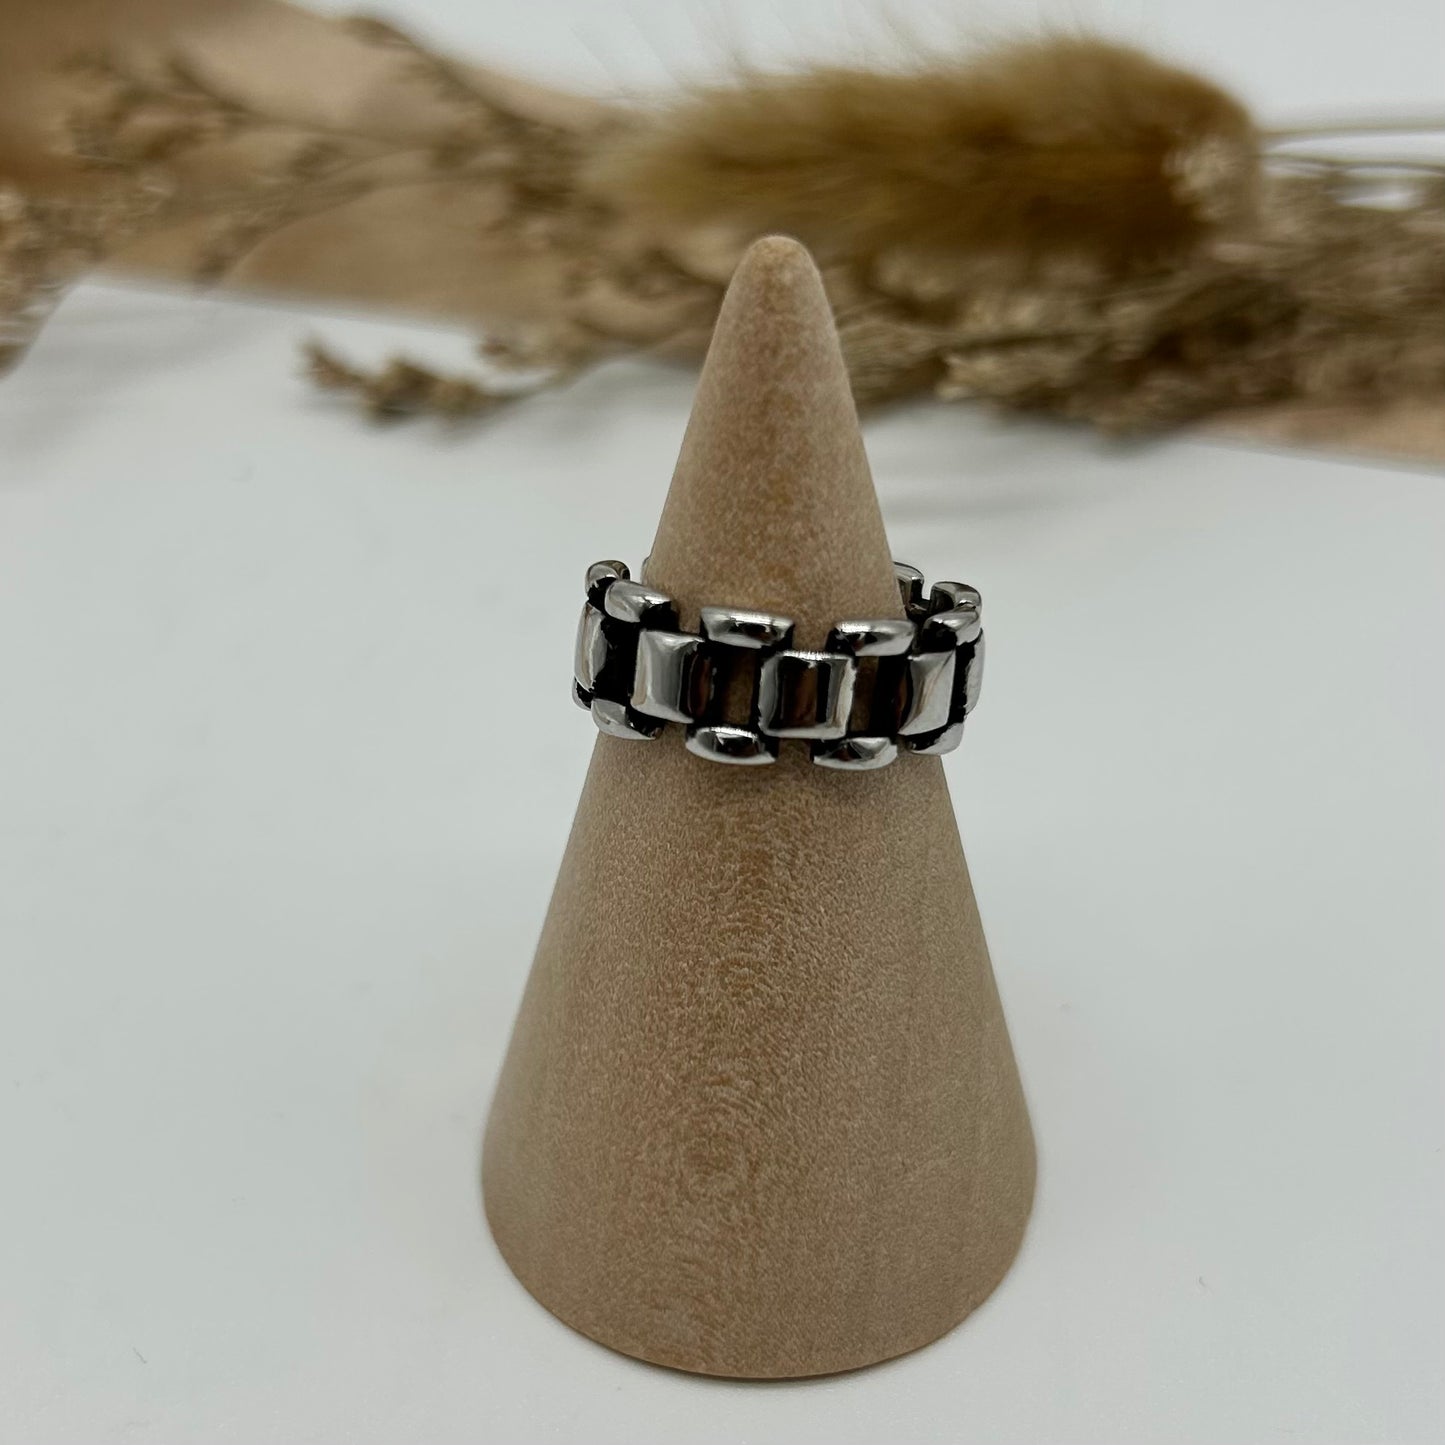 Silver Chain Ring